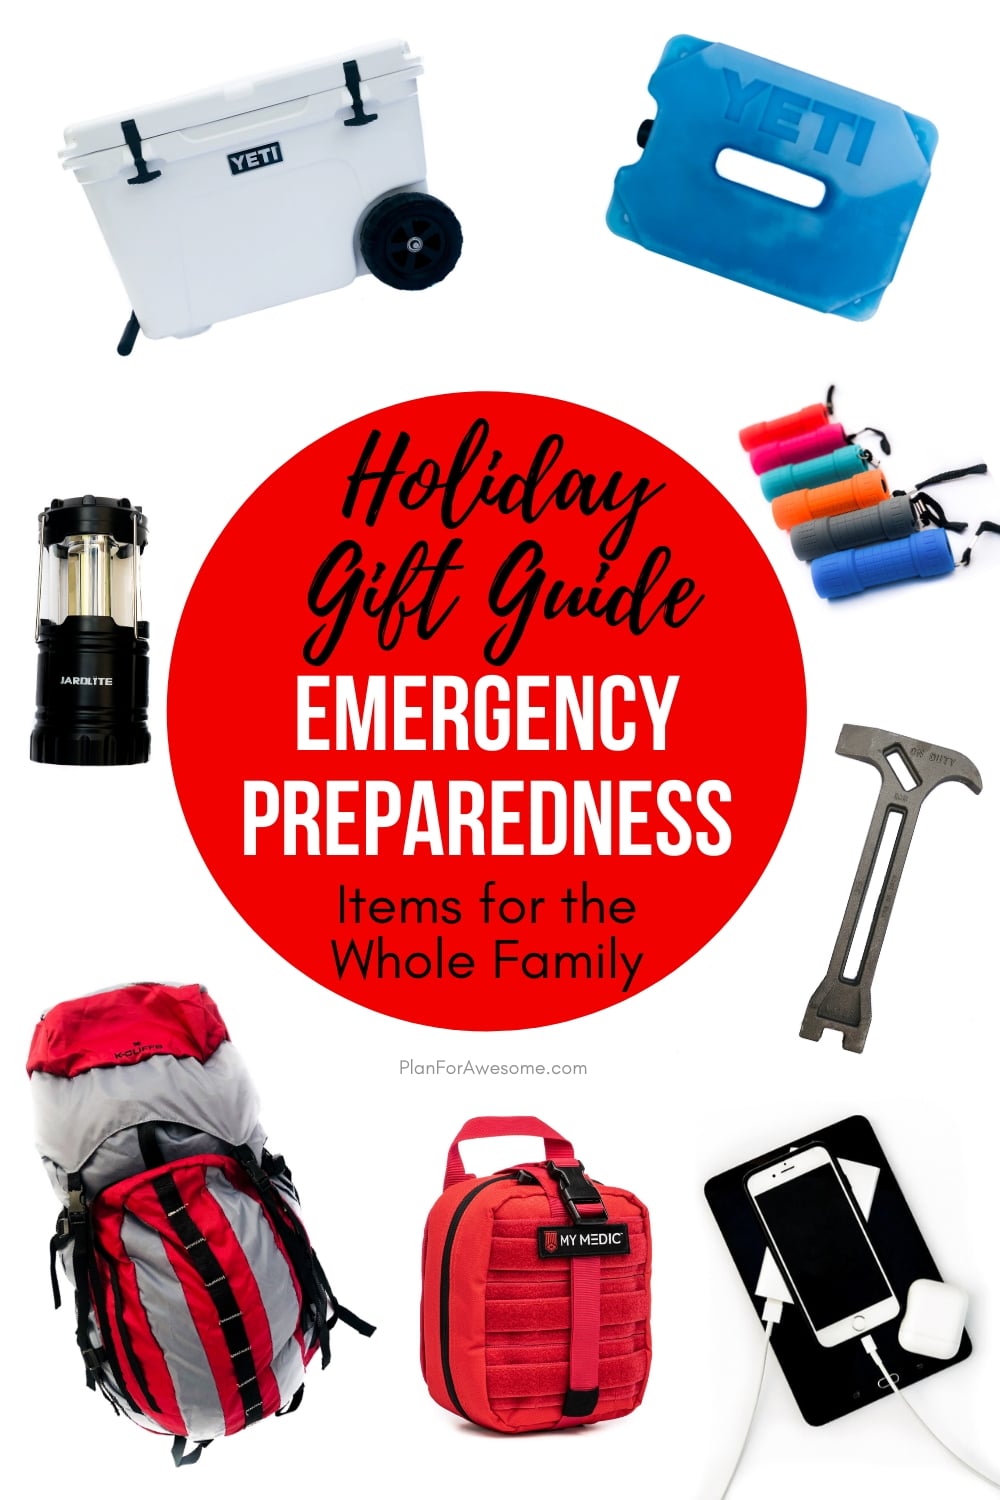 Awesome list of emergency preparedness gift ideas!  I love the idea of gifting something useful like this to my family.  This girl even has some good ideas for little kids that would still be fun and exciting to get as gifts but that can help your family get prepared for emergencies! #holidaygiftguide #christmasgiftideas